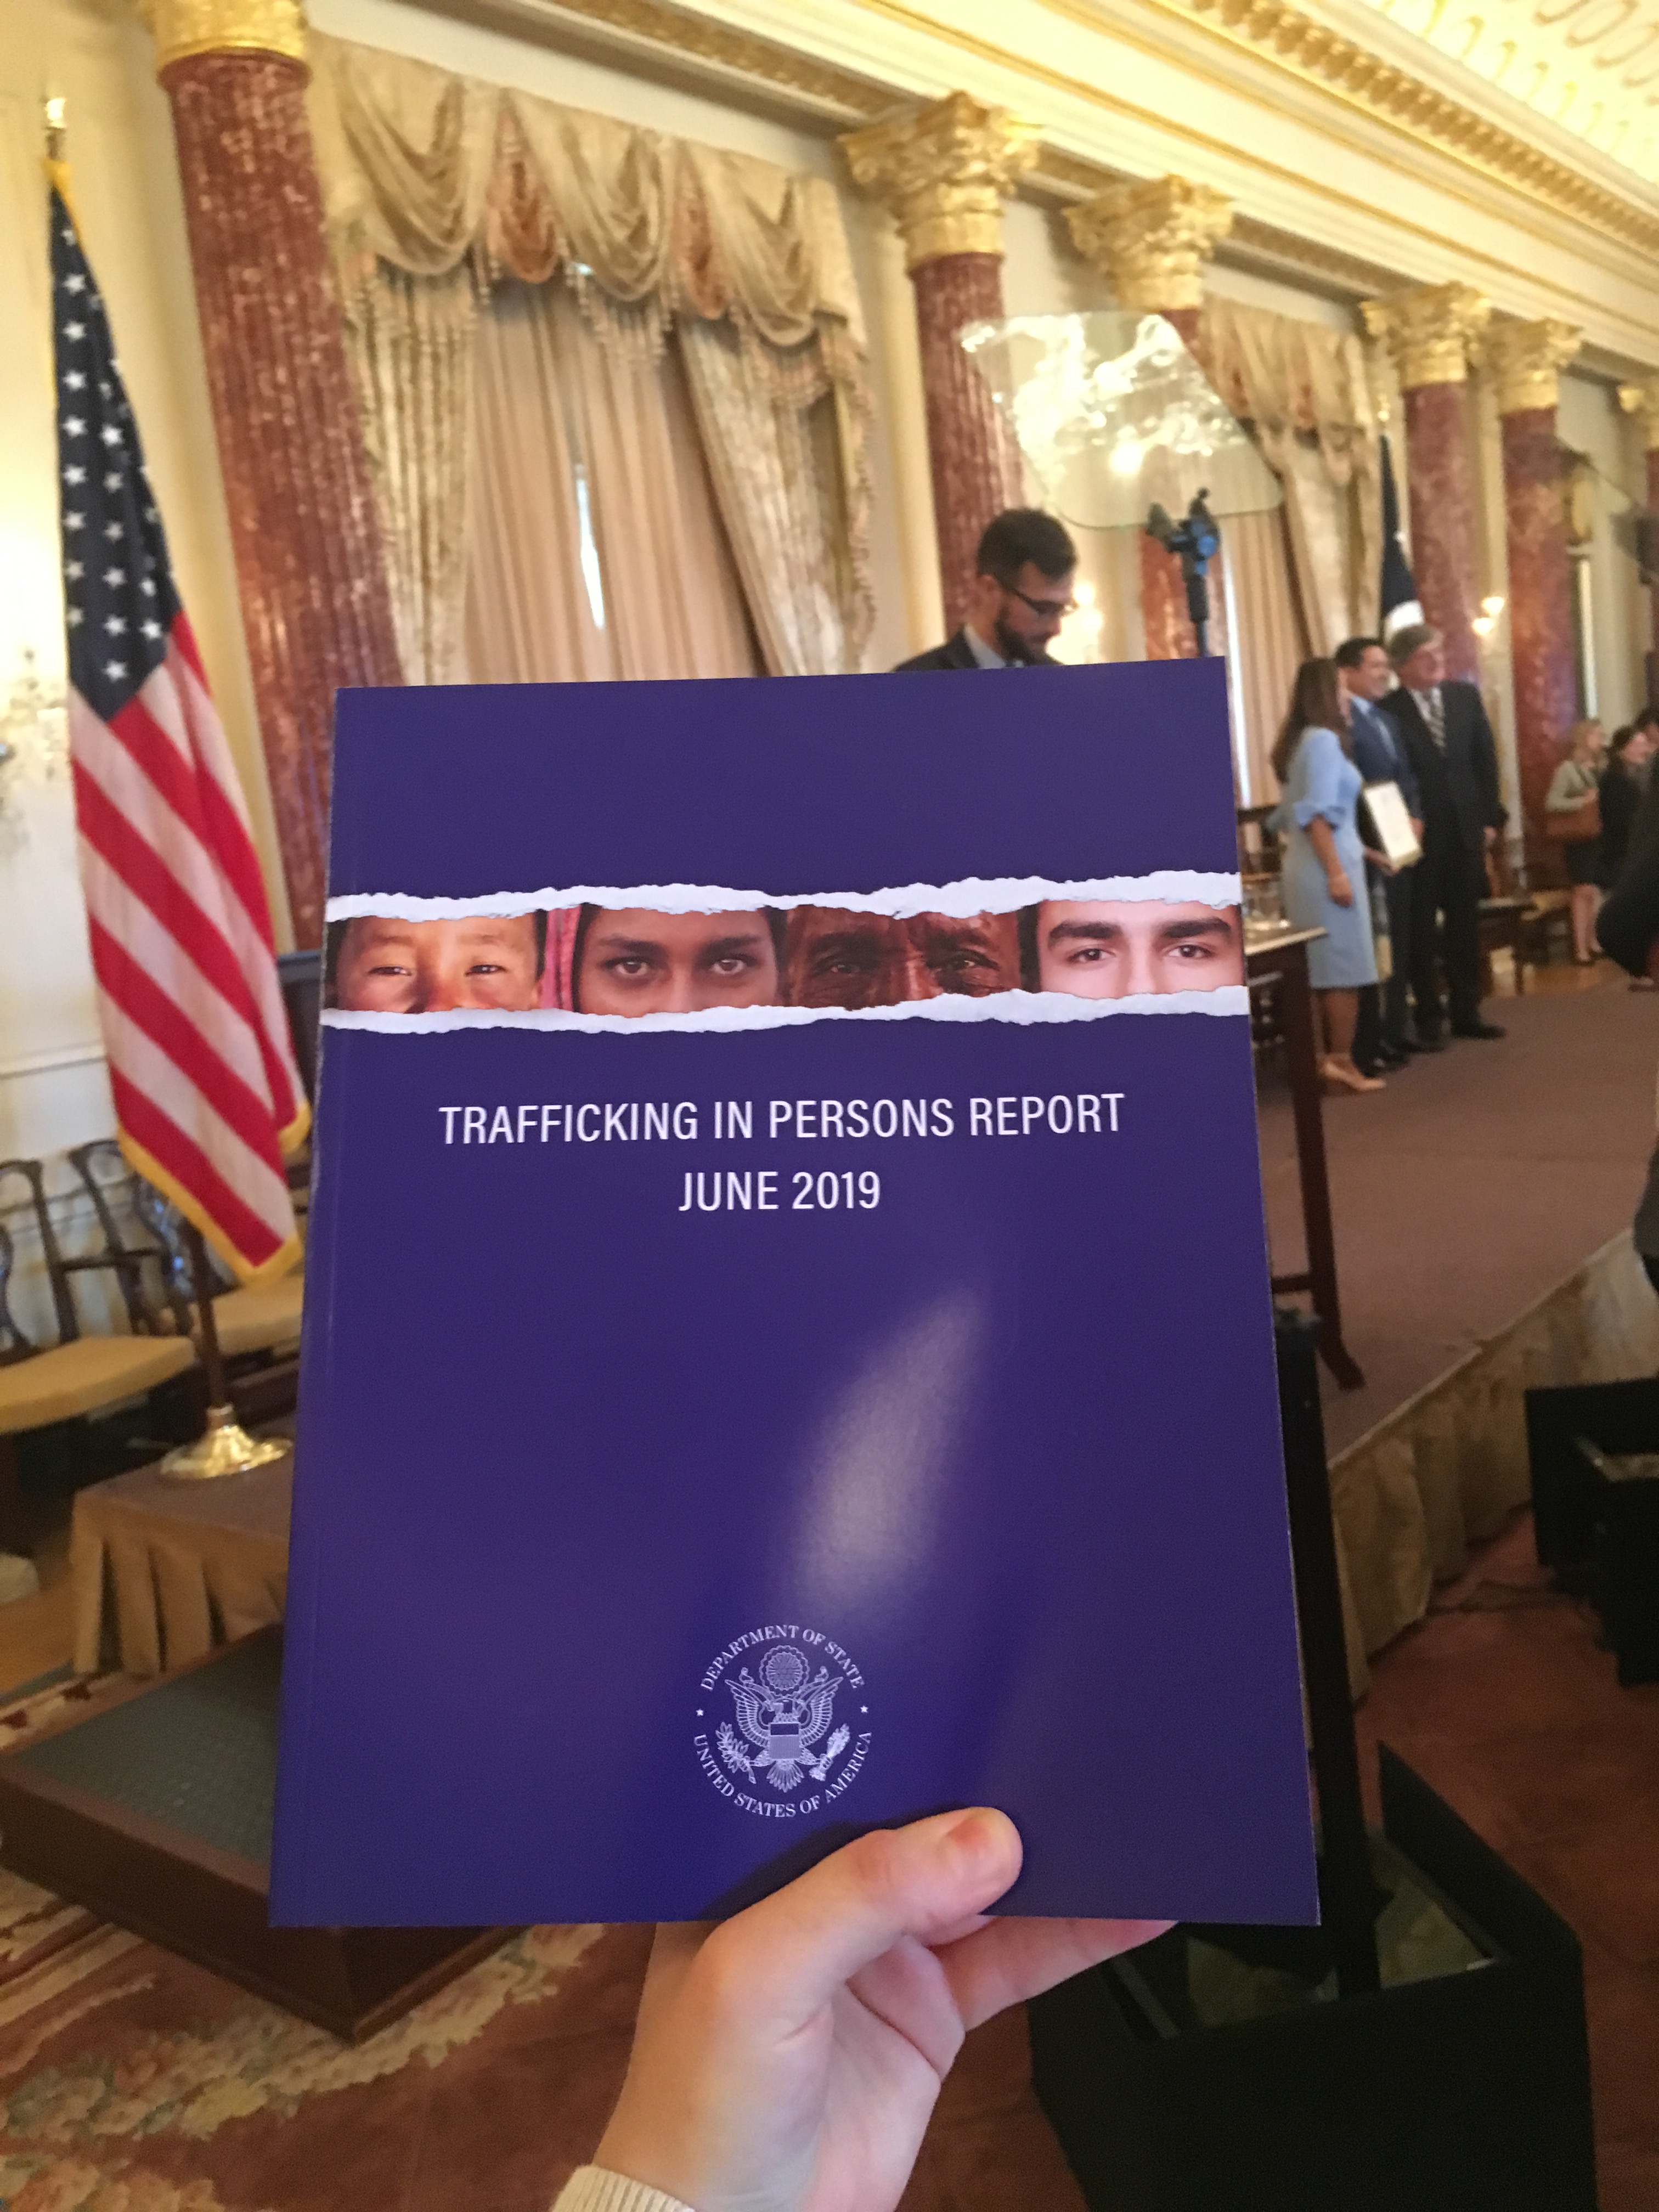 FTS Programs Help Lift Two Countries in 2019 Trafficking Report